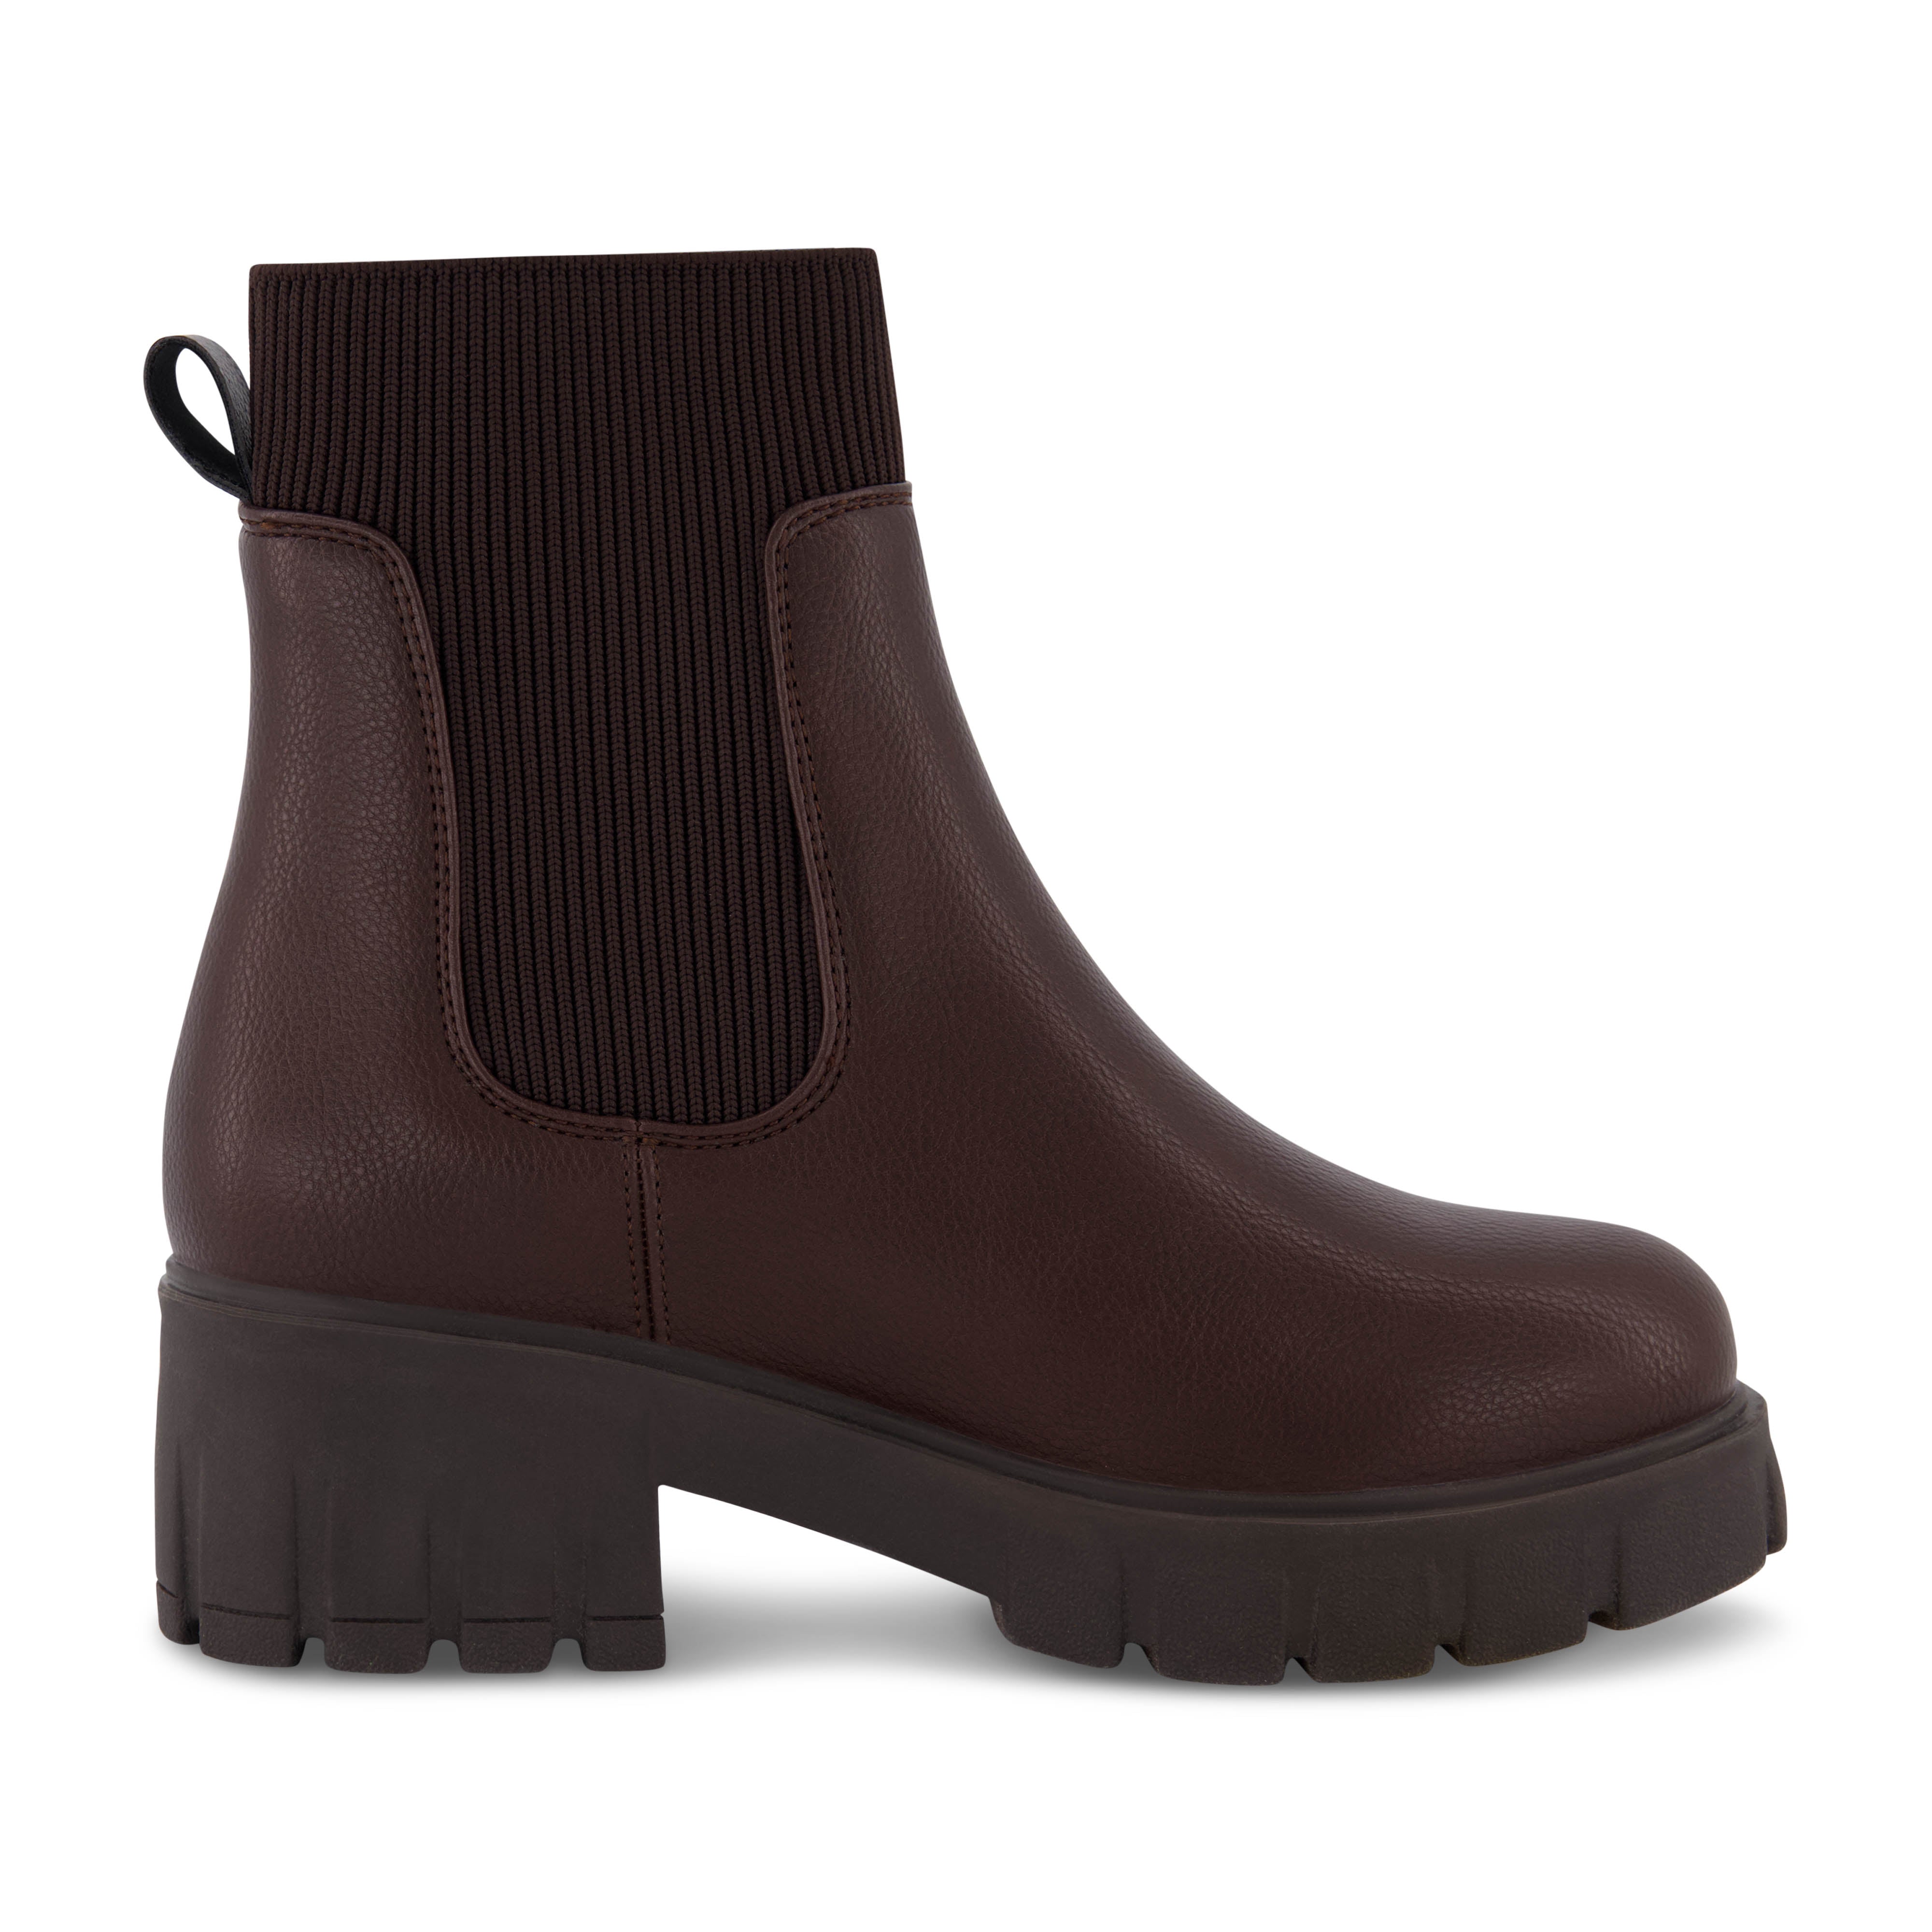 Sparks Lug Sole Chelsea Boot